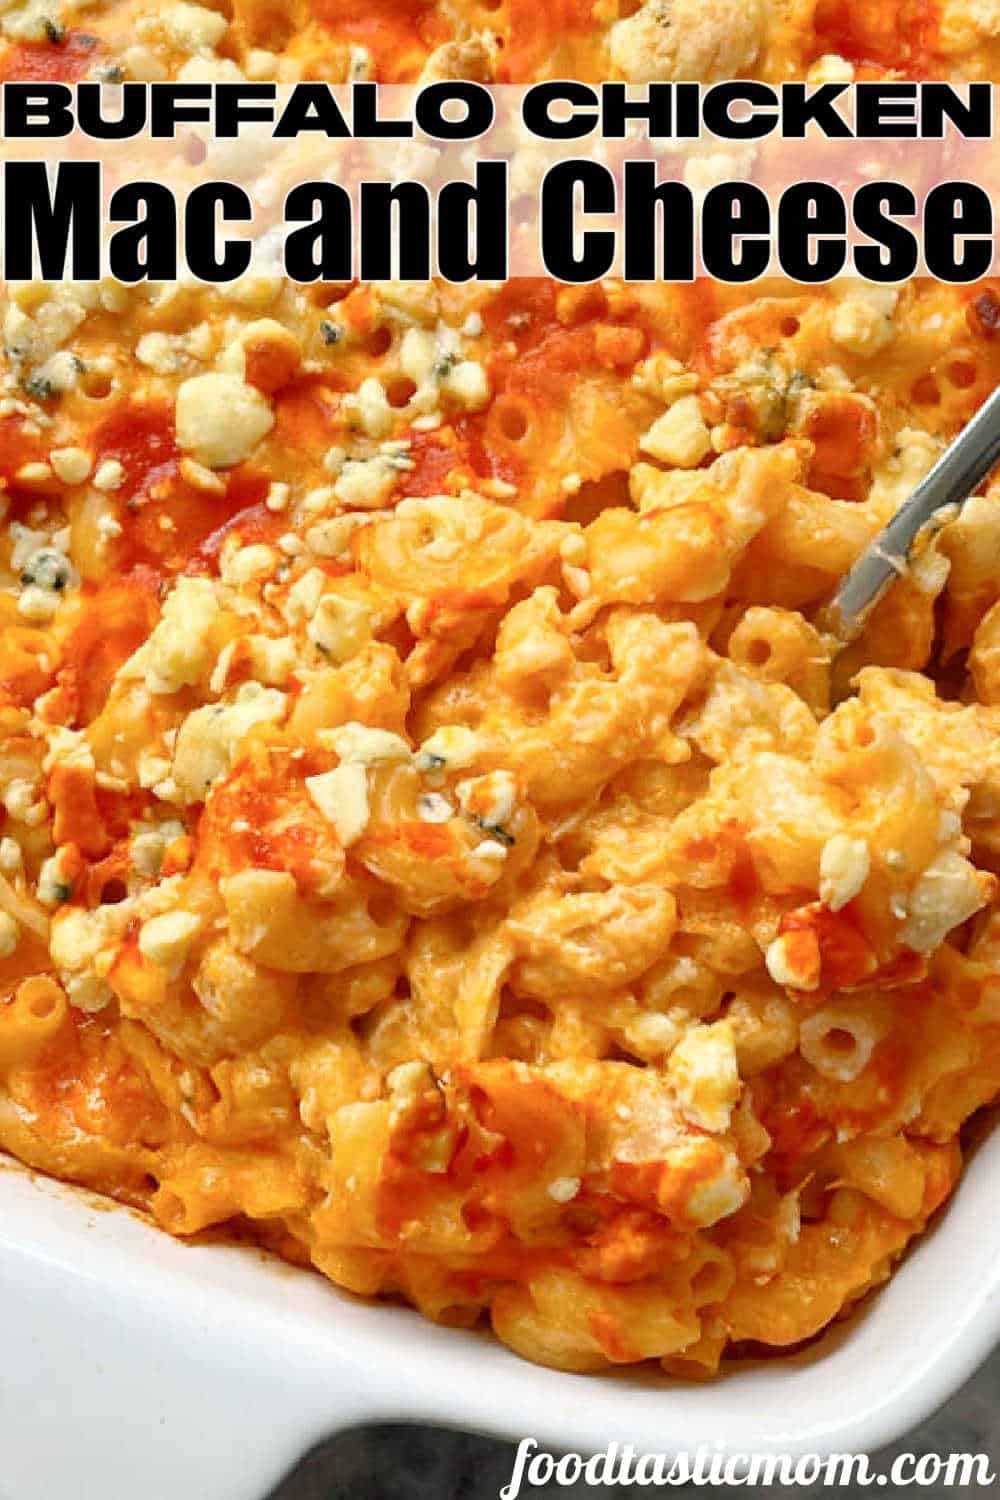 Here it is - the best, creamy, zesty, full of flavor recipe for Buffalo Chicken Mac and Cheese - perfect for entertaining and tailgating. via @foodtasticmom